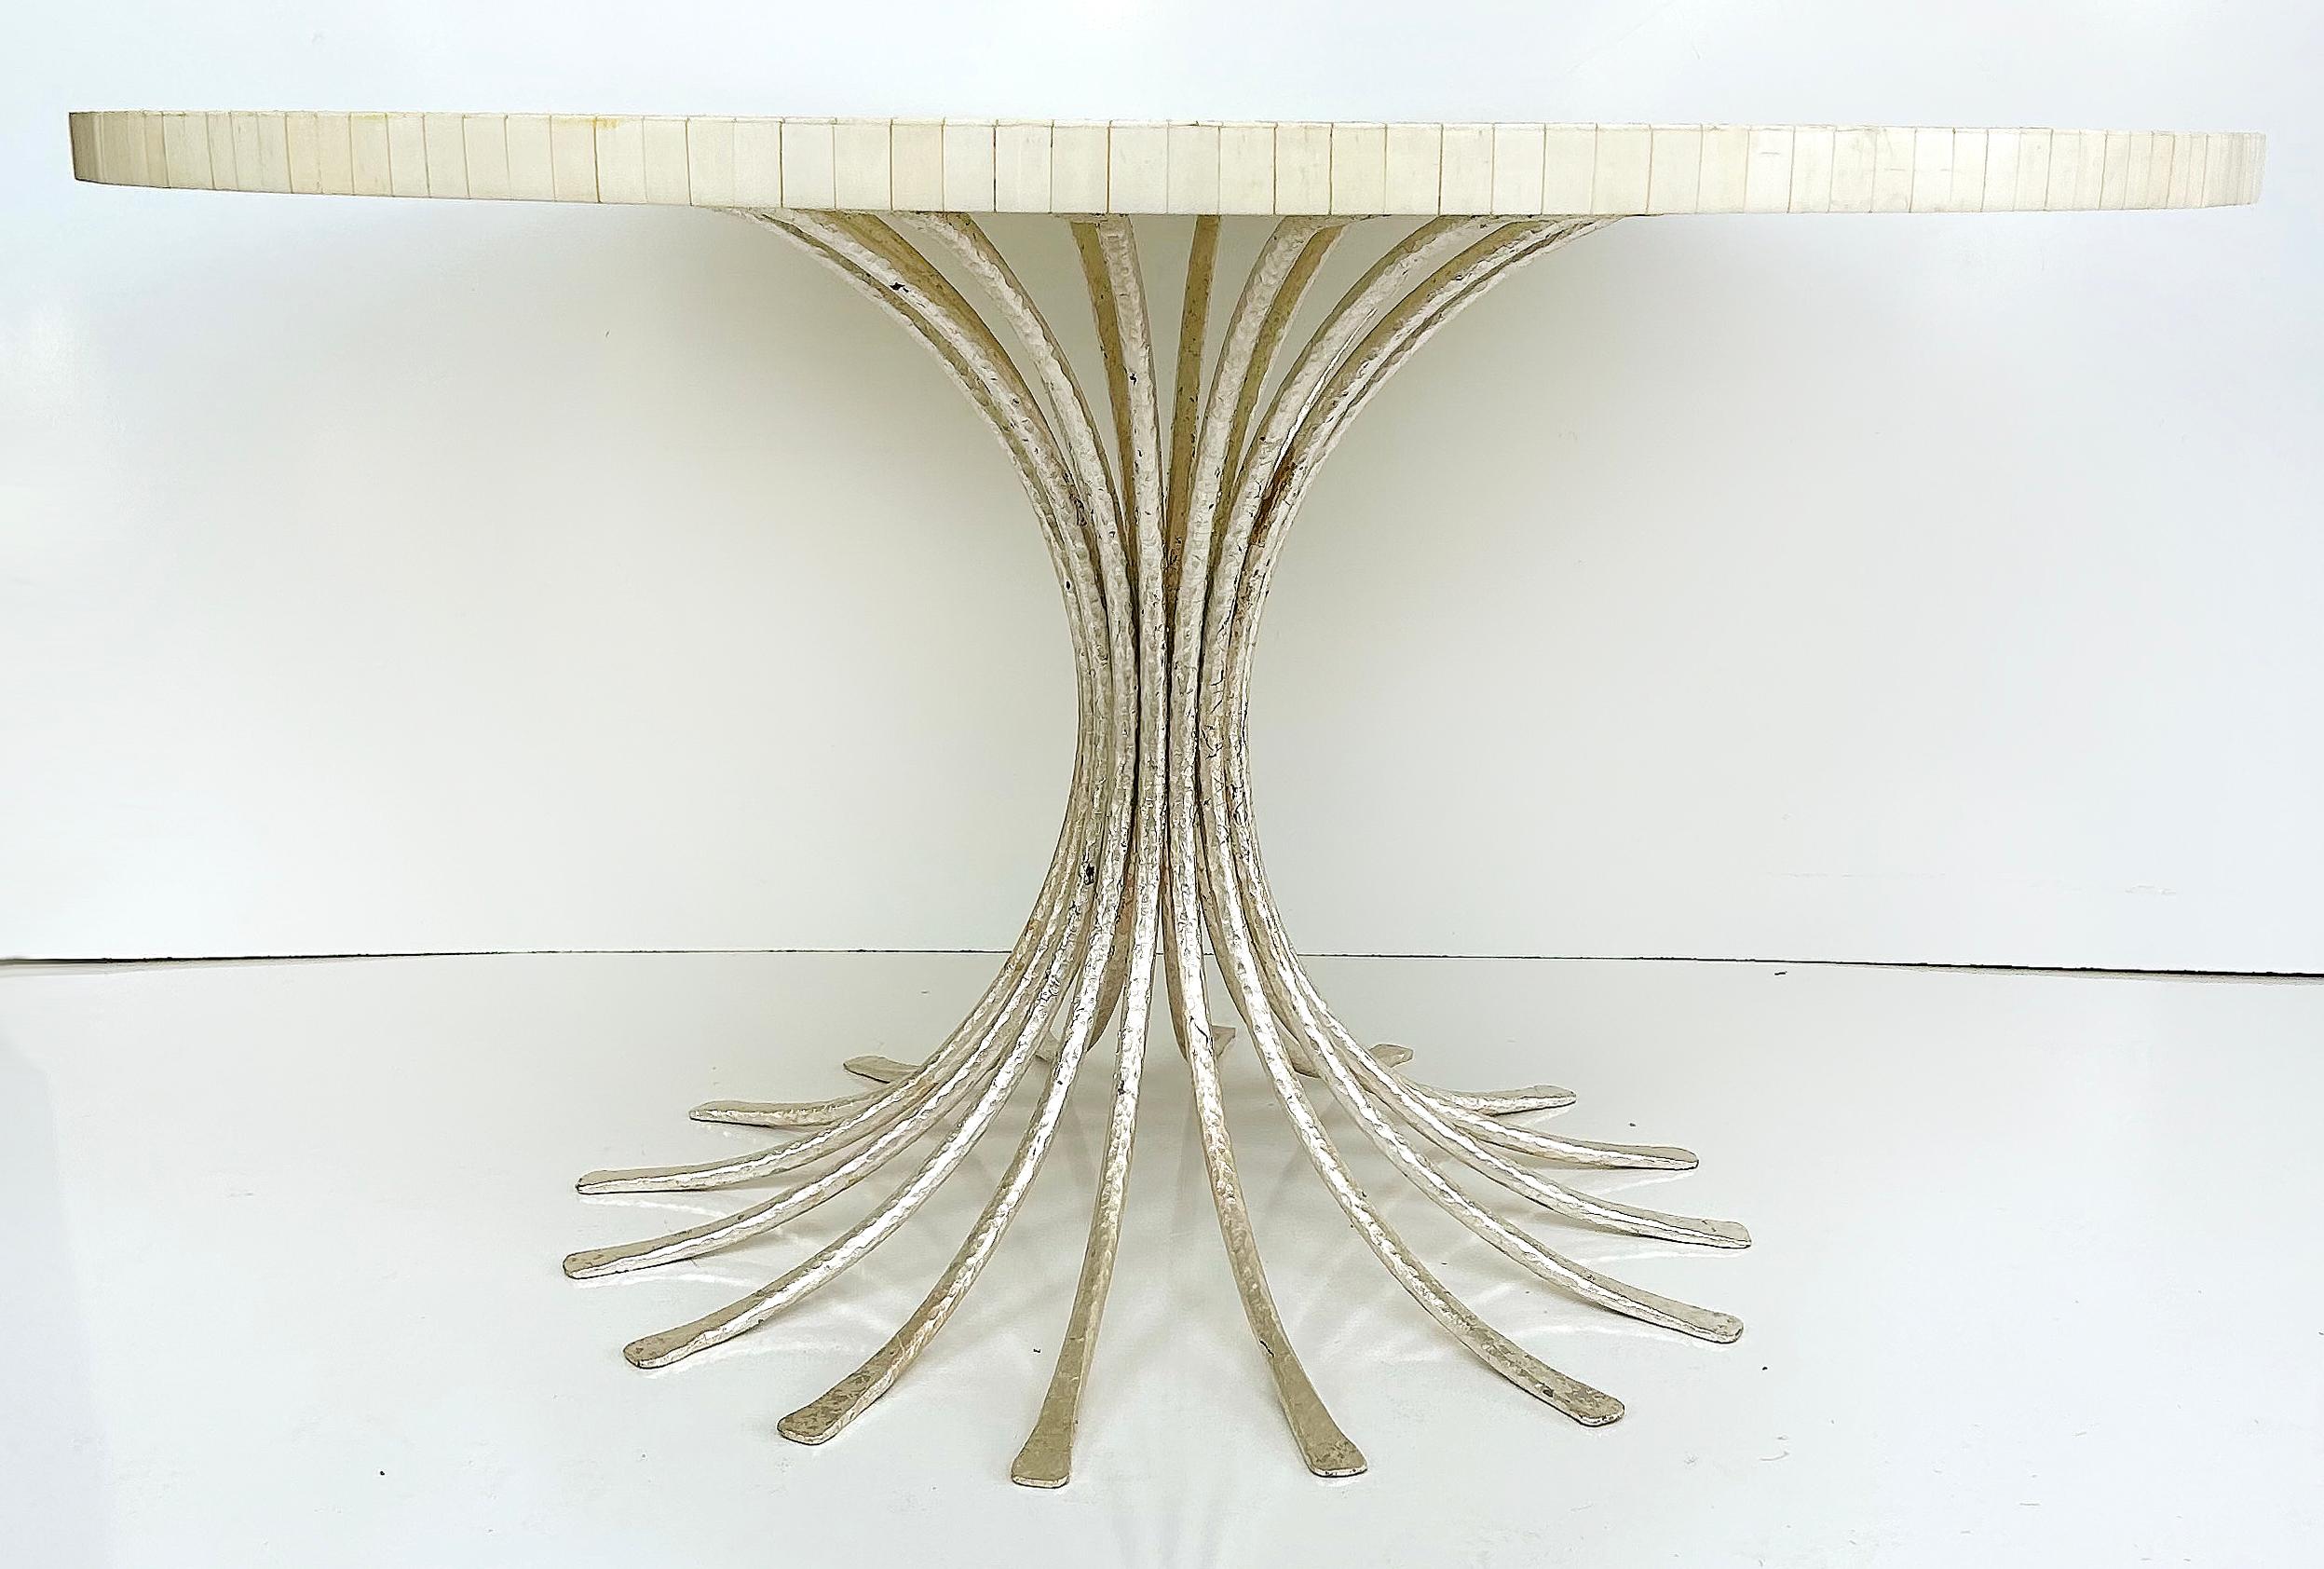 Ironies Tessellated Bone Sunburst Top Dining Table with Silver Gilt Metal Base

Offered for sale is an Ironies tessellated bone sunburst pattern dining room table top with a silver gilt metal base. The base is Ironies 